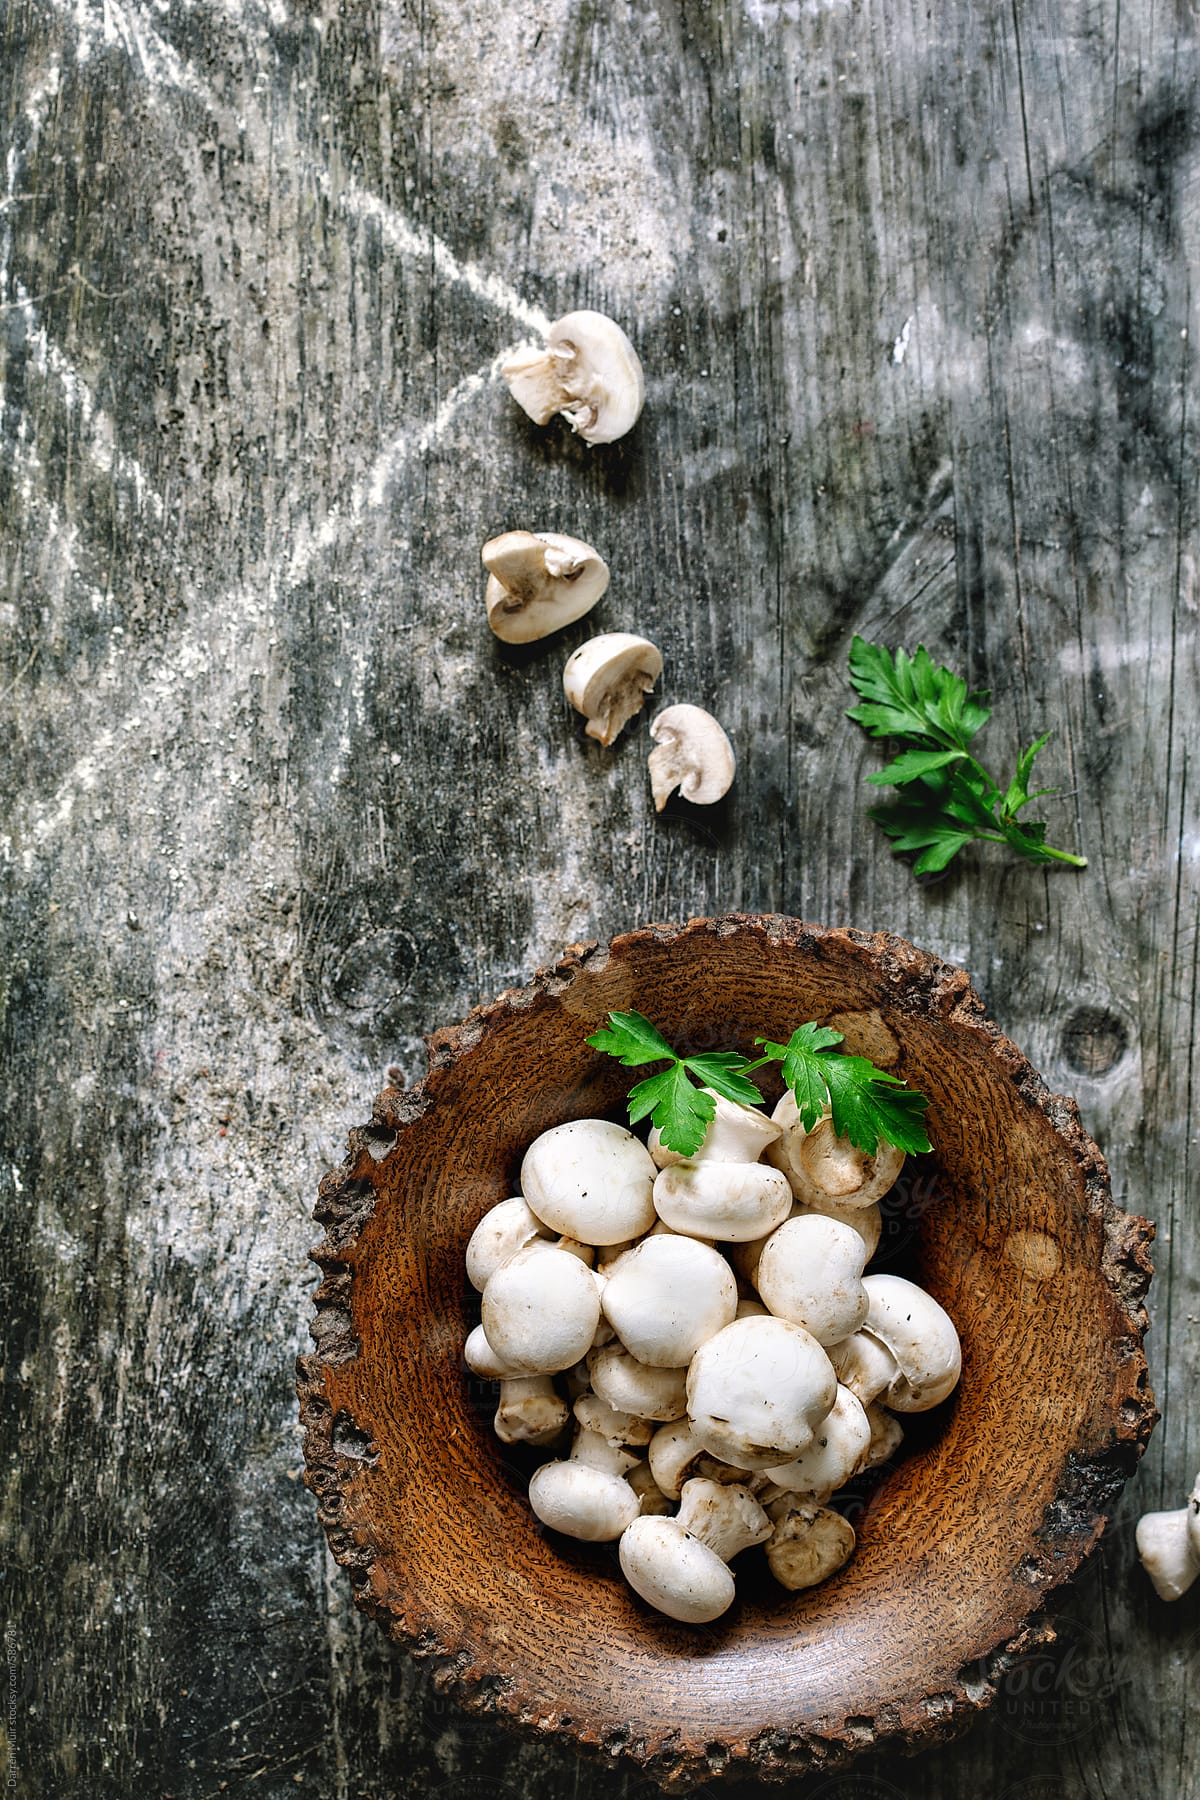 Baby button mushrooms in wooden bowl.